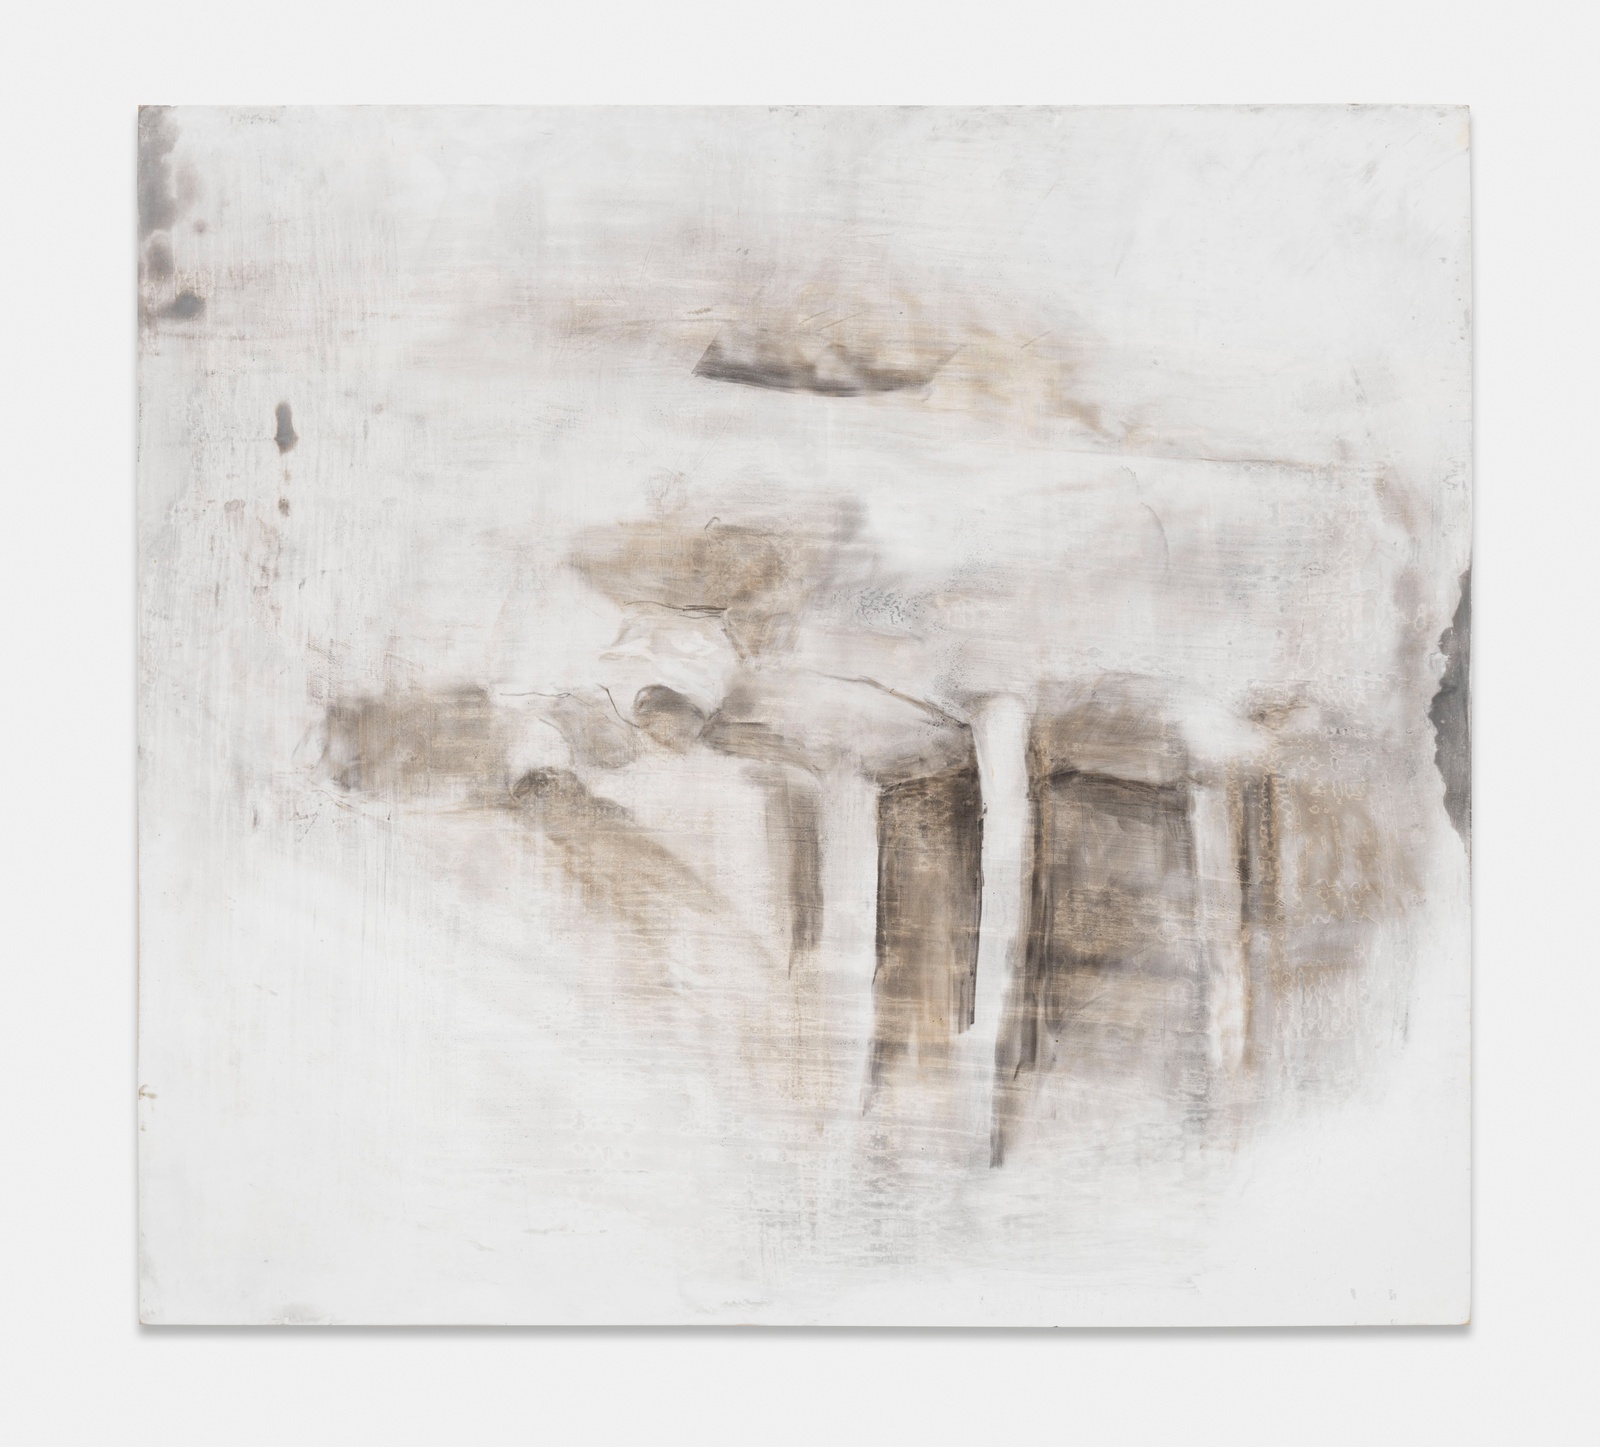 Beaux MendesUntitled, 2022charcoal on marble dust on panel39.6 x 43.2 cm | 15 2/3 x 17 in